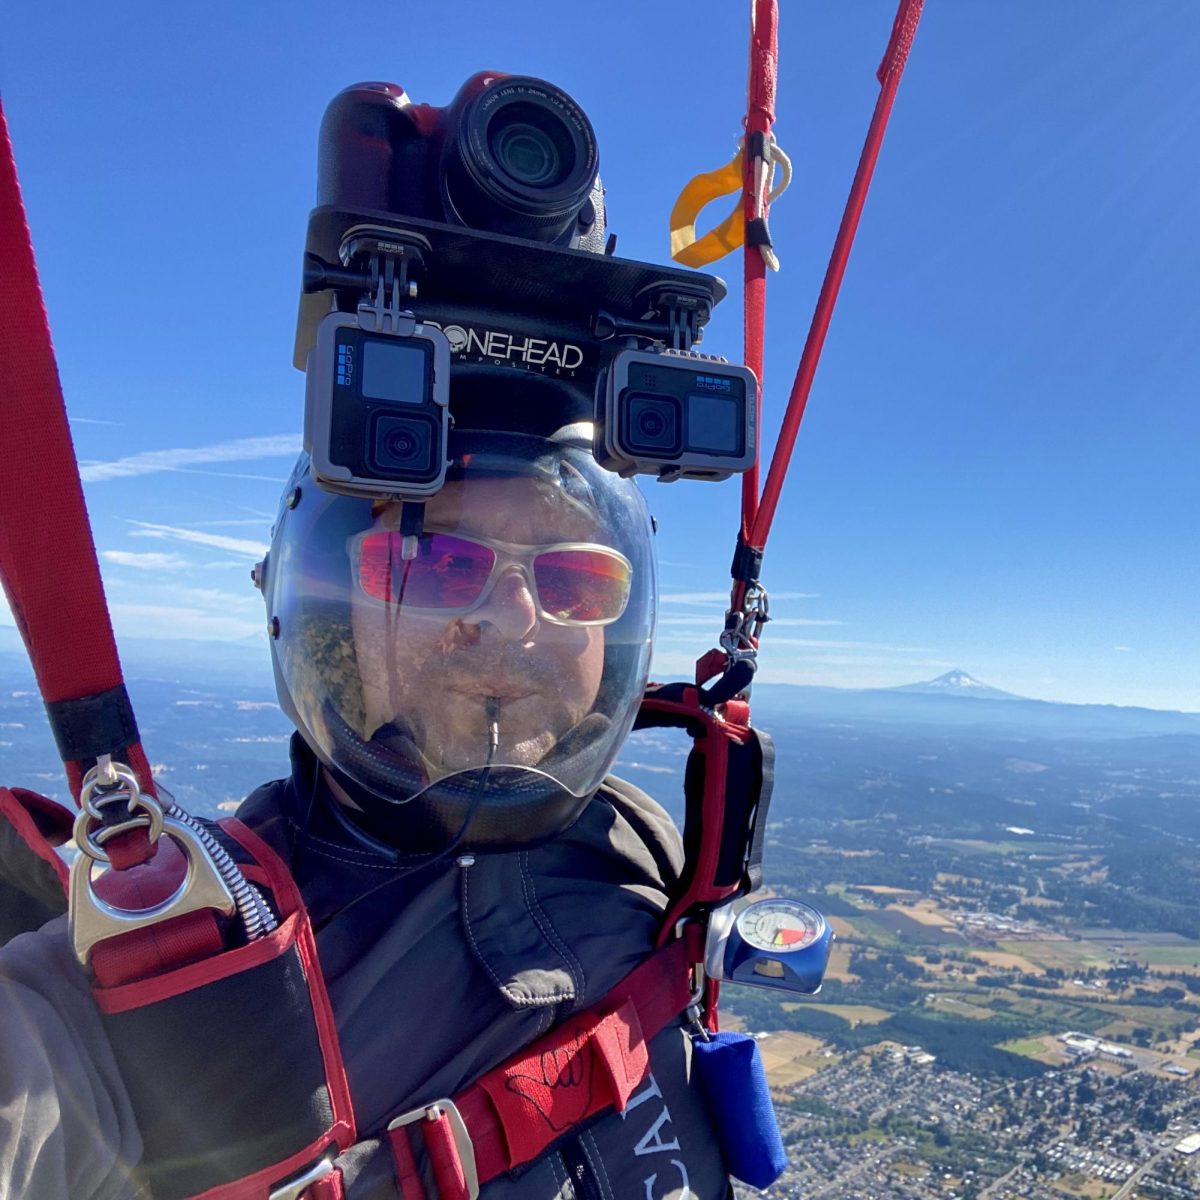 Marc Leglise (’03) snaps a selfie from the air using a camera-helmet system. His passion for skydiving connects him to his work at Columbia Sportswear, where as a senior manager of e-commerce technology, he helps people secure the gear he uses in the air.